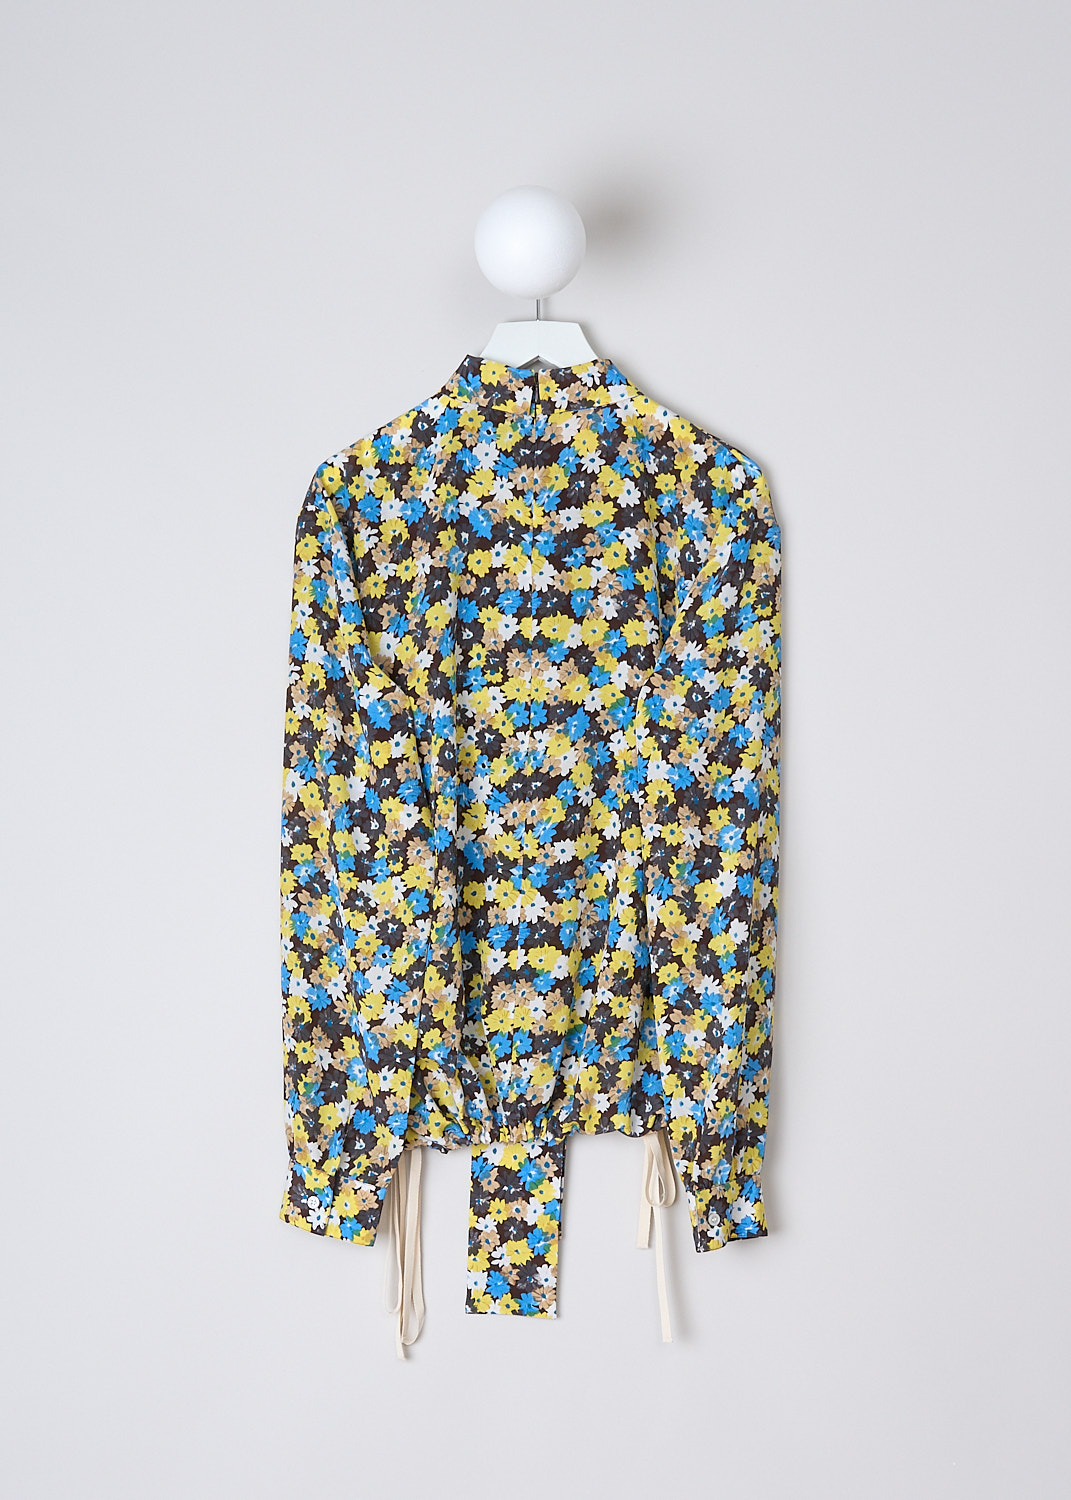 PLAN C, DAISY BOUQUET CRÊPE DE CHINE BLOUSE, CMCAD55K00_TS011_FIY04, Yellow, Print, Blue, Back, This long sleeve Crêpe de Chine blouse has an all-over Daisy Bouquet print. The blouse has a bow-tie neckline. An inverted pleats runs vertically down the front. The long sleeves have buttoned cuffs. The blouse has a hemline with drawstrings on either side. In the back of the neck, the blouse has a concealed centre zip.


